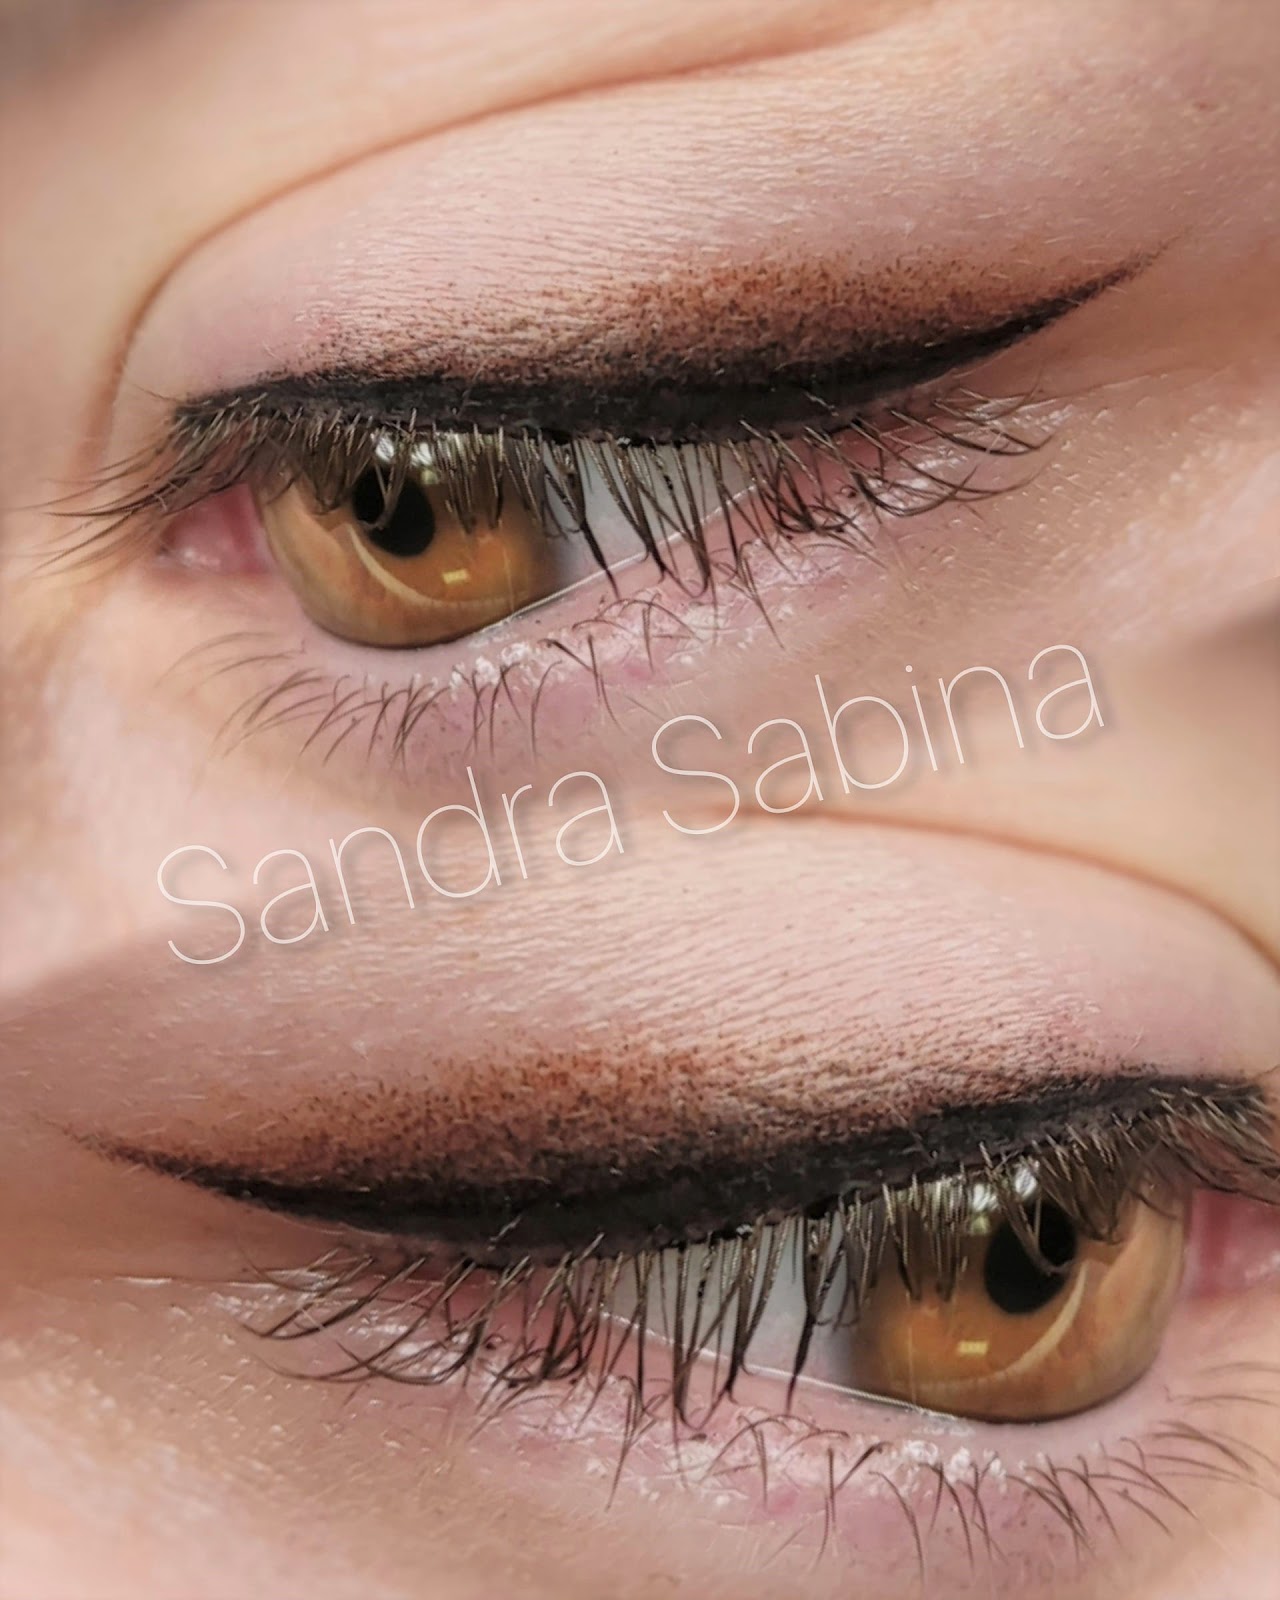 Sandra Sabina. Maquillage permanent Eye liner, lèvres, sourcils. Microblading. Toulouse Sud